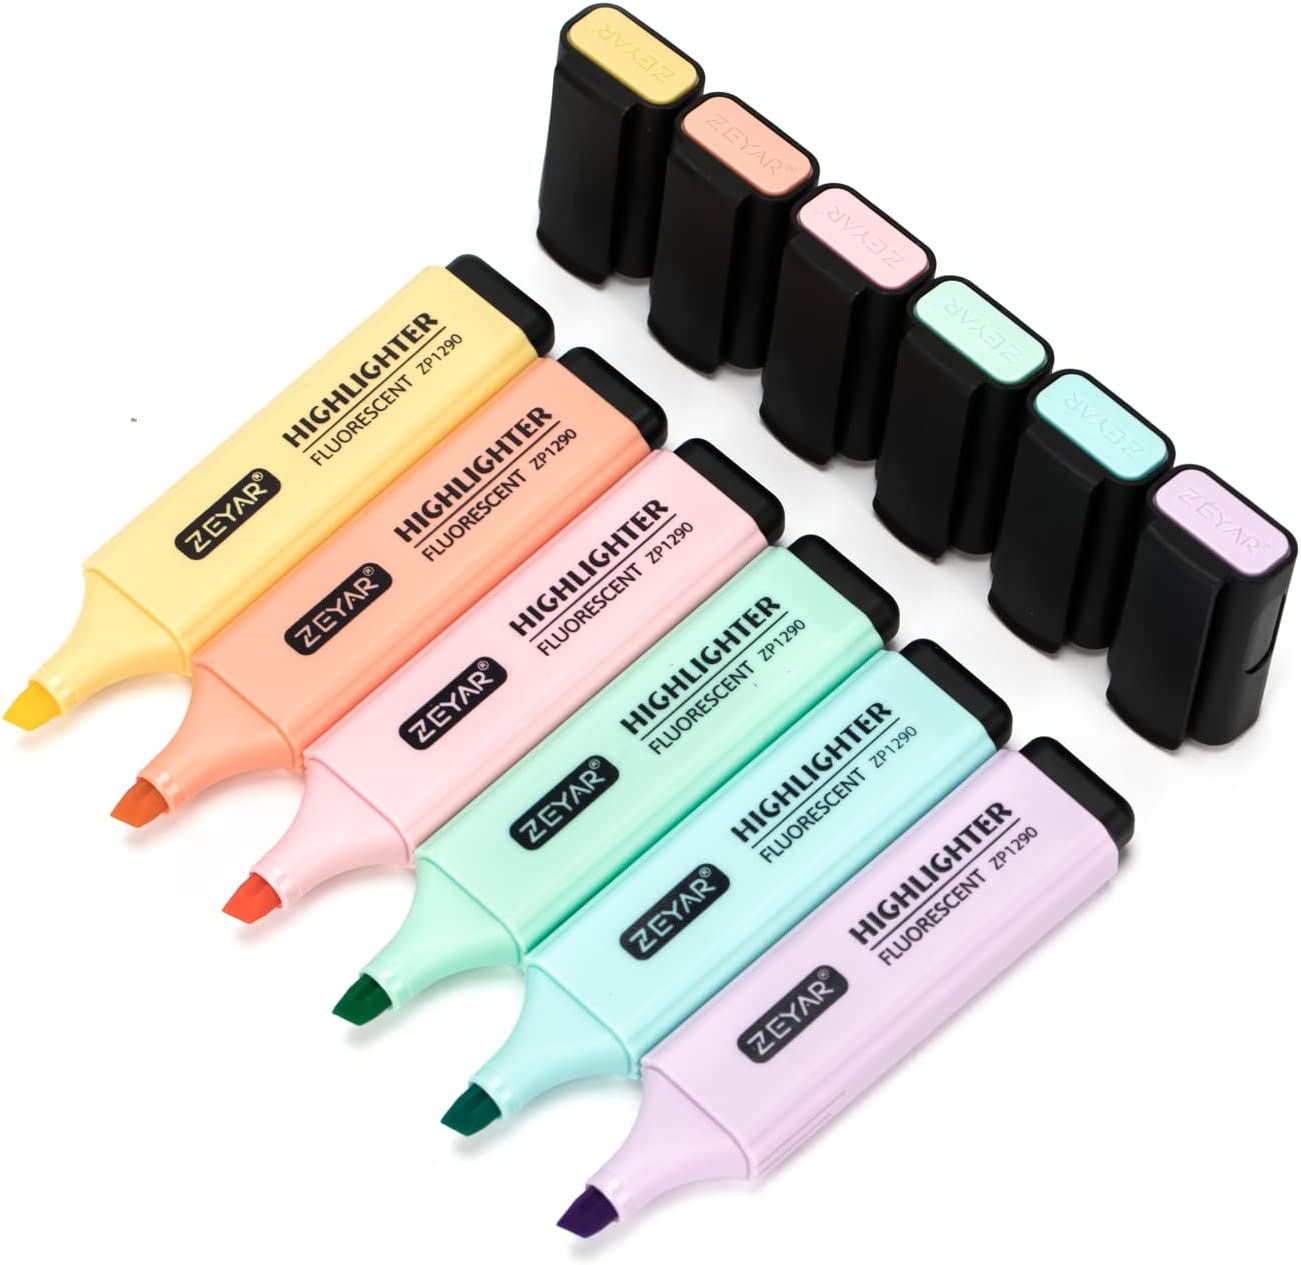 https://www.dontwasteyourmoney.com/wp-content/uploads/2022/12/zeyar-non-toxic-instant-dry-highlighters-6-count-highlighter.jpg